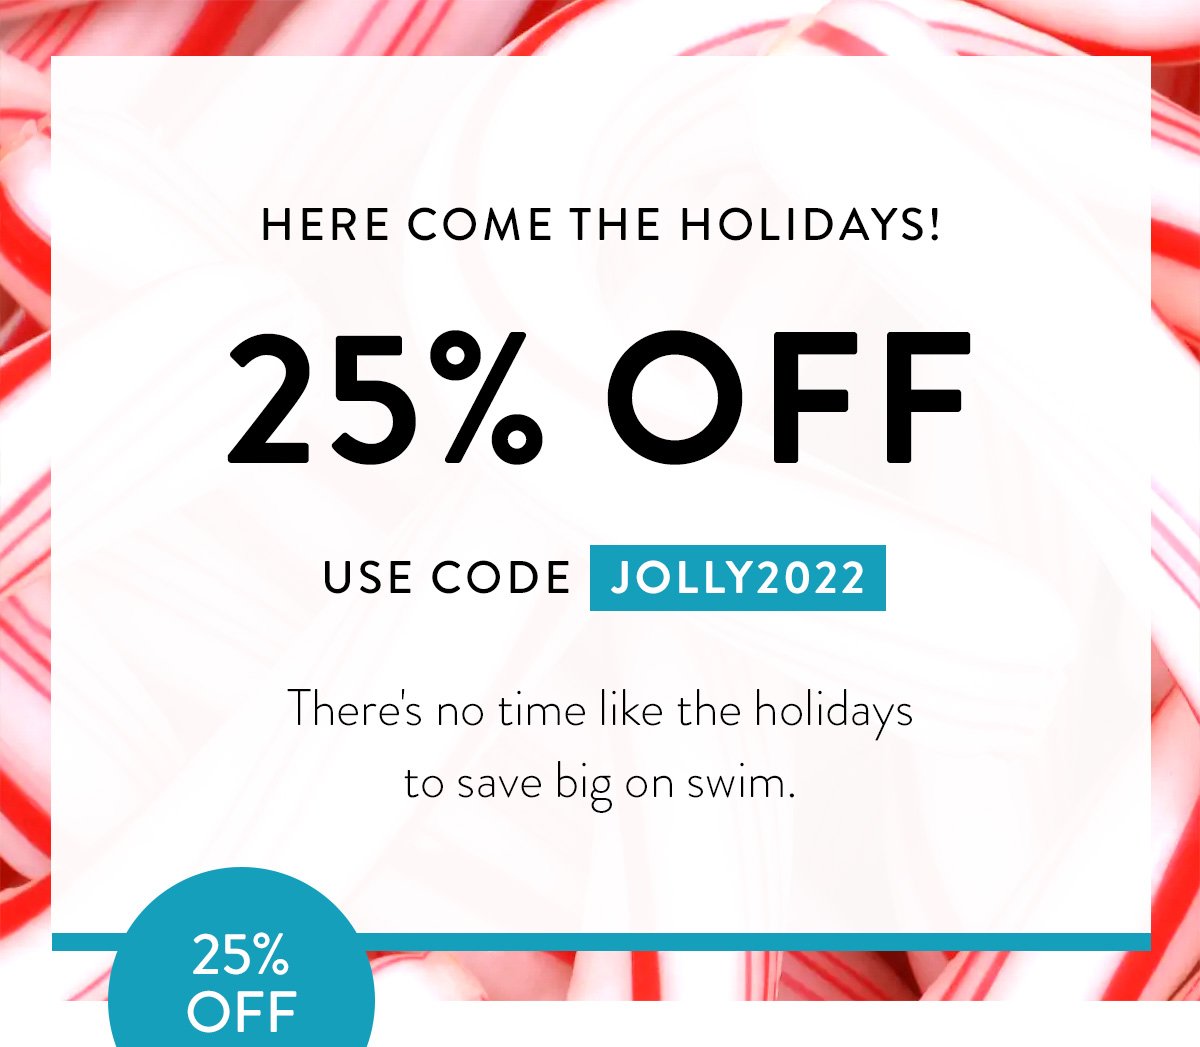 HERE COME THE HOLIDAYS! / 25% OFF / USE CODE JOLLY2022 / There's no time like the holidays to save big on swim.